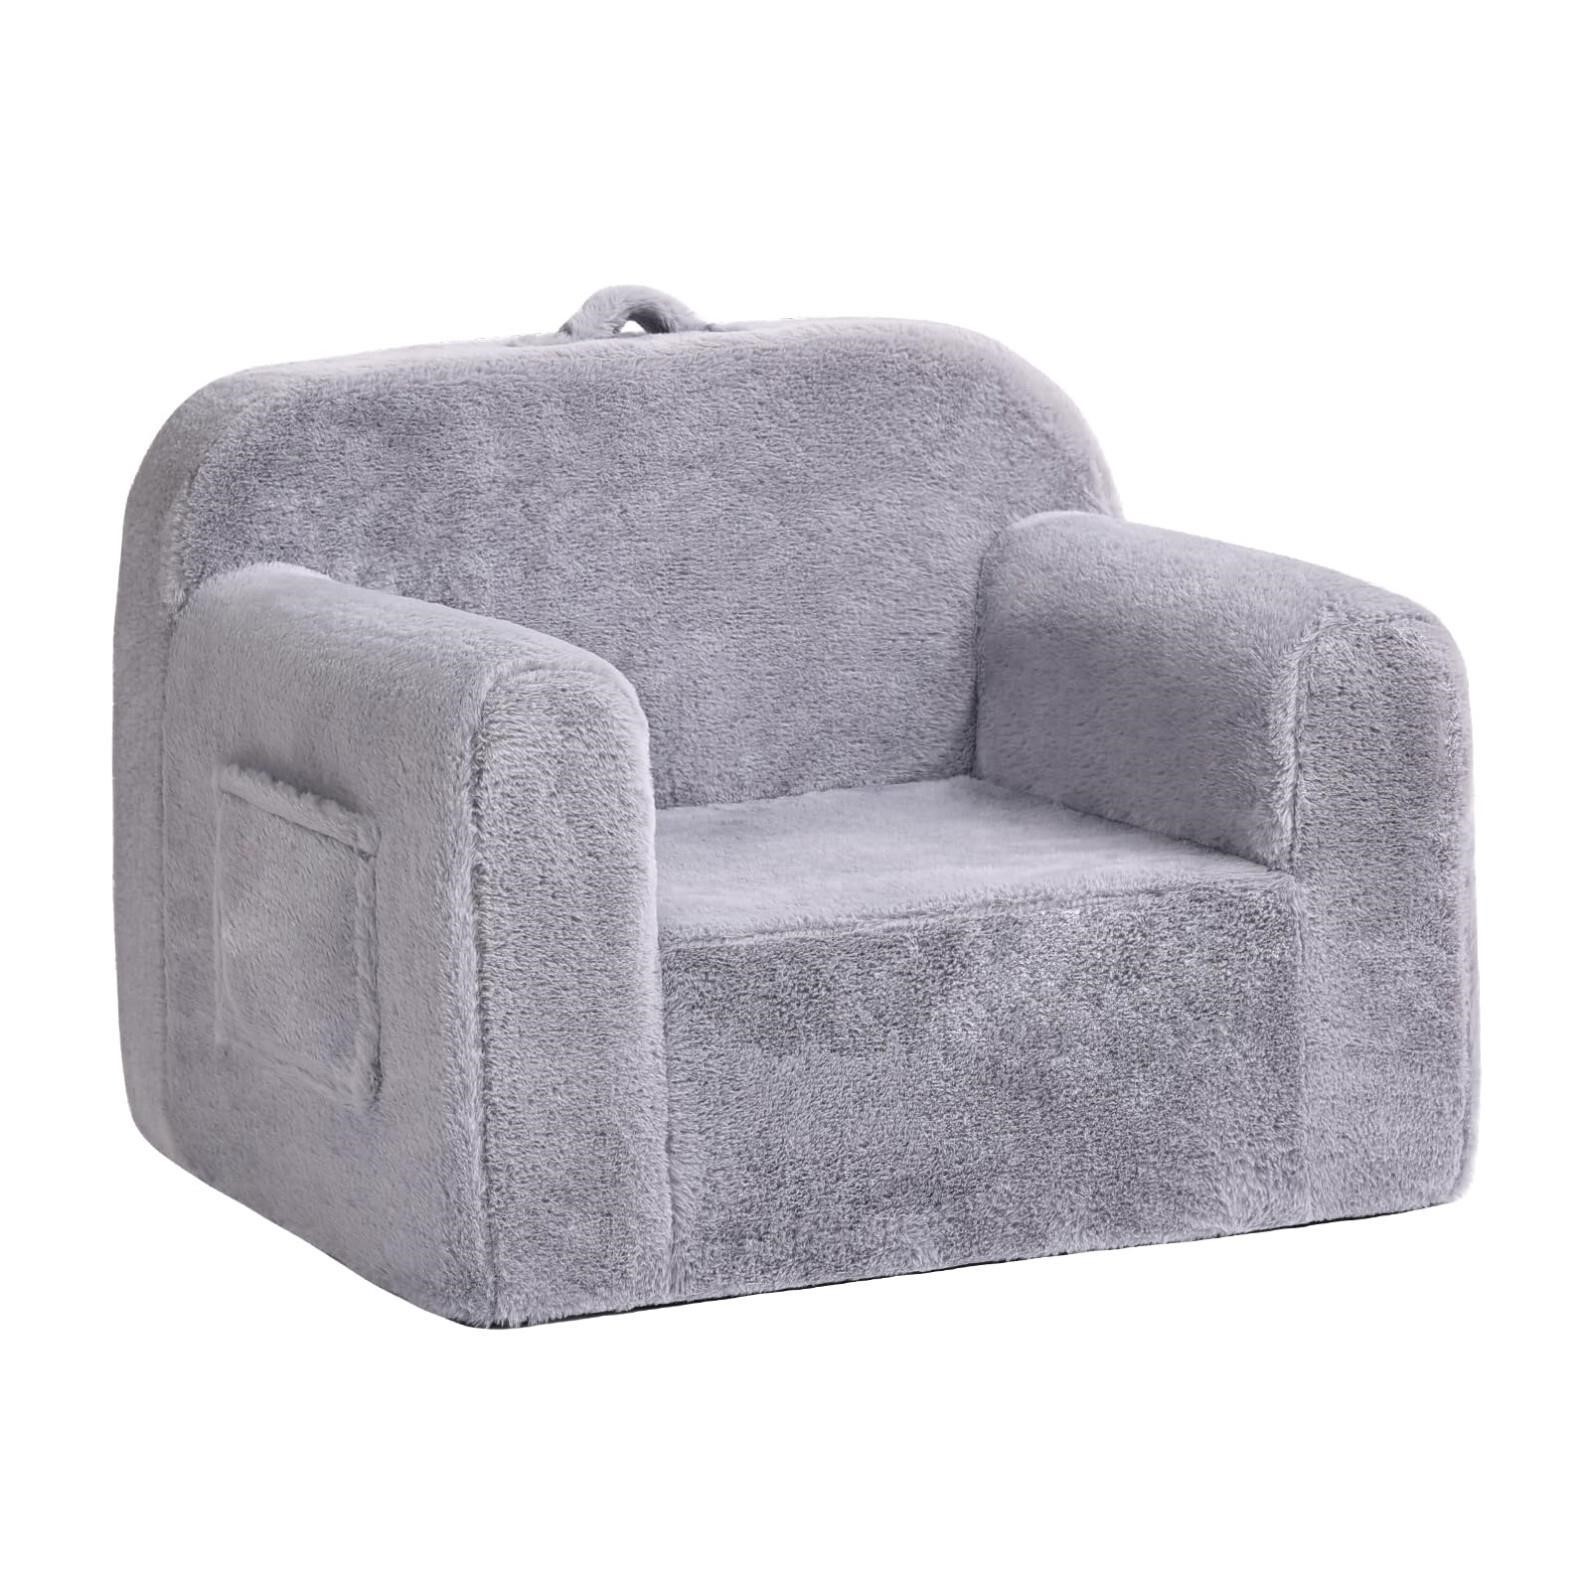 Welnow Kids Sofa Toddler Chair, Chirldren Couch wi